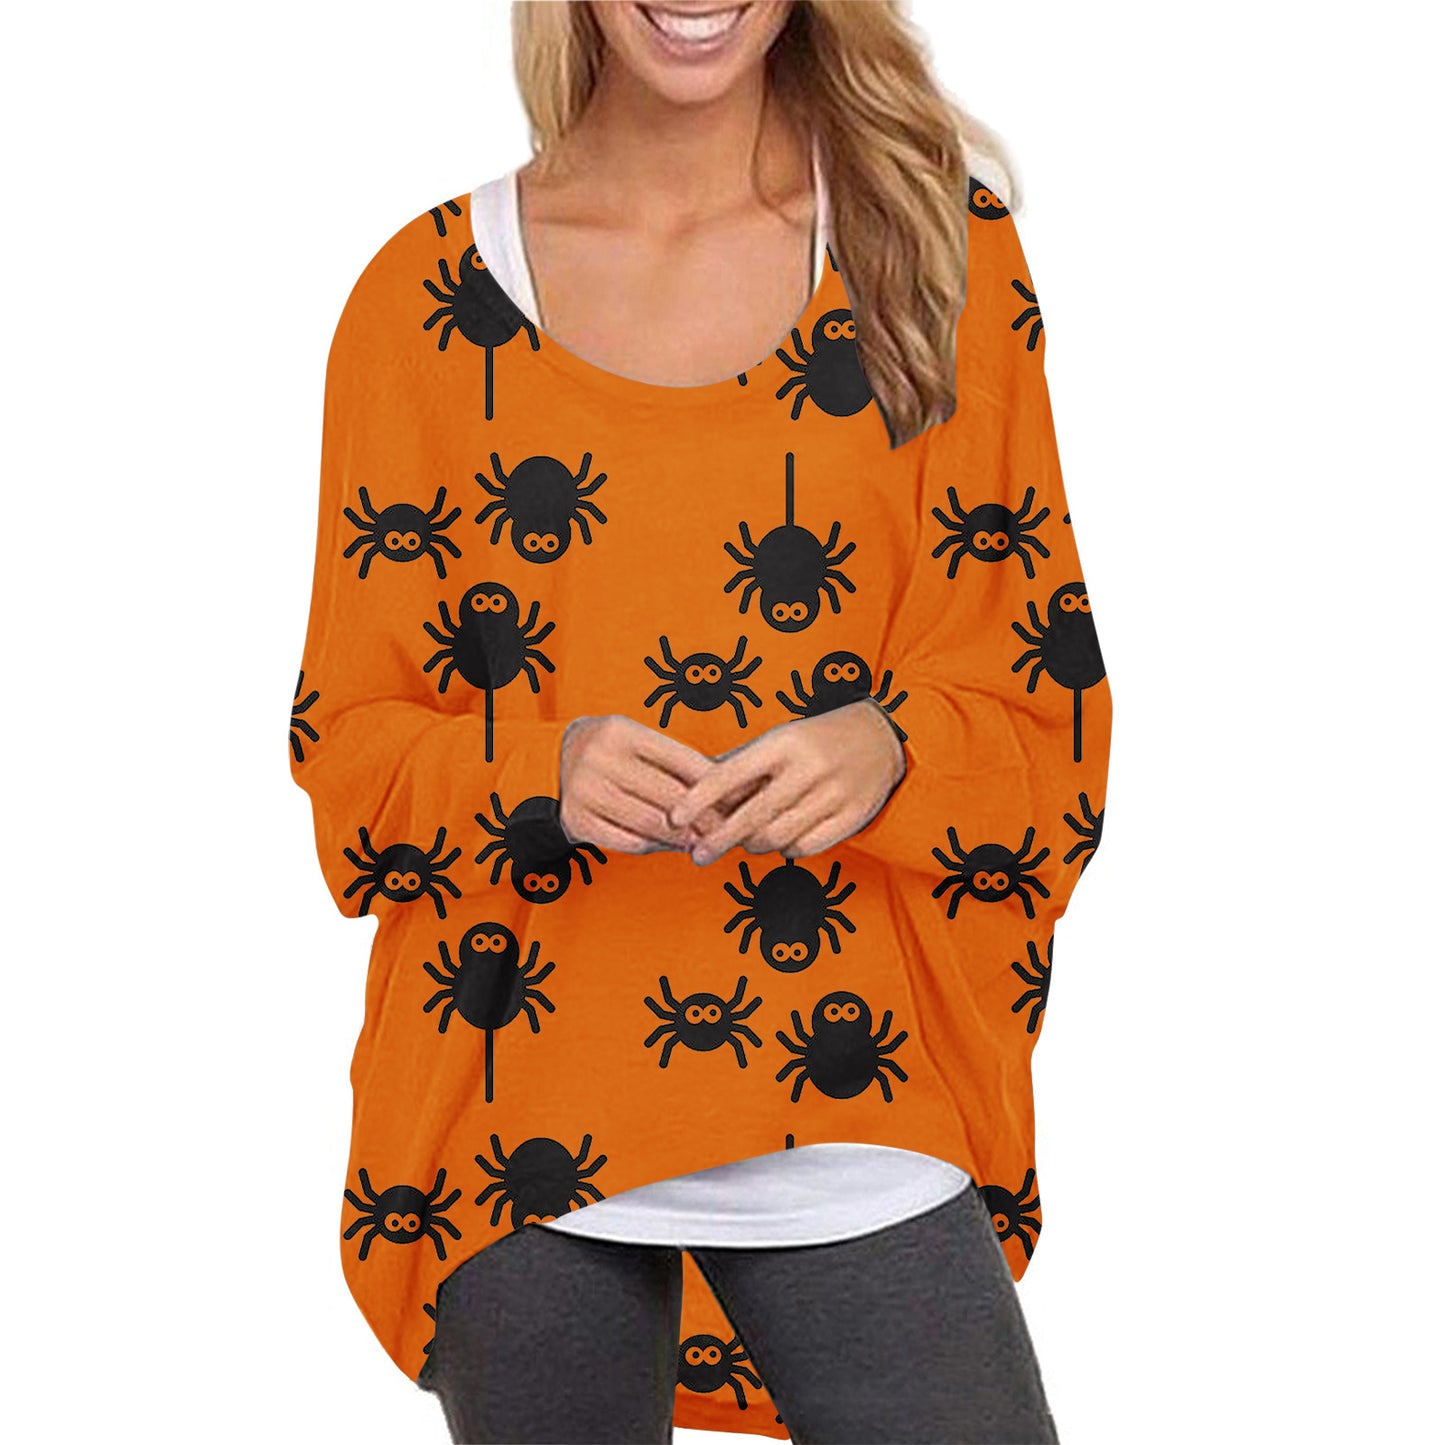 Women Halloween Pumpkin Print Long Sleeves Tops-For Halloween-Spider-S-Free Shipping at meselling99